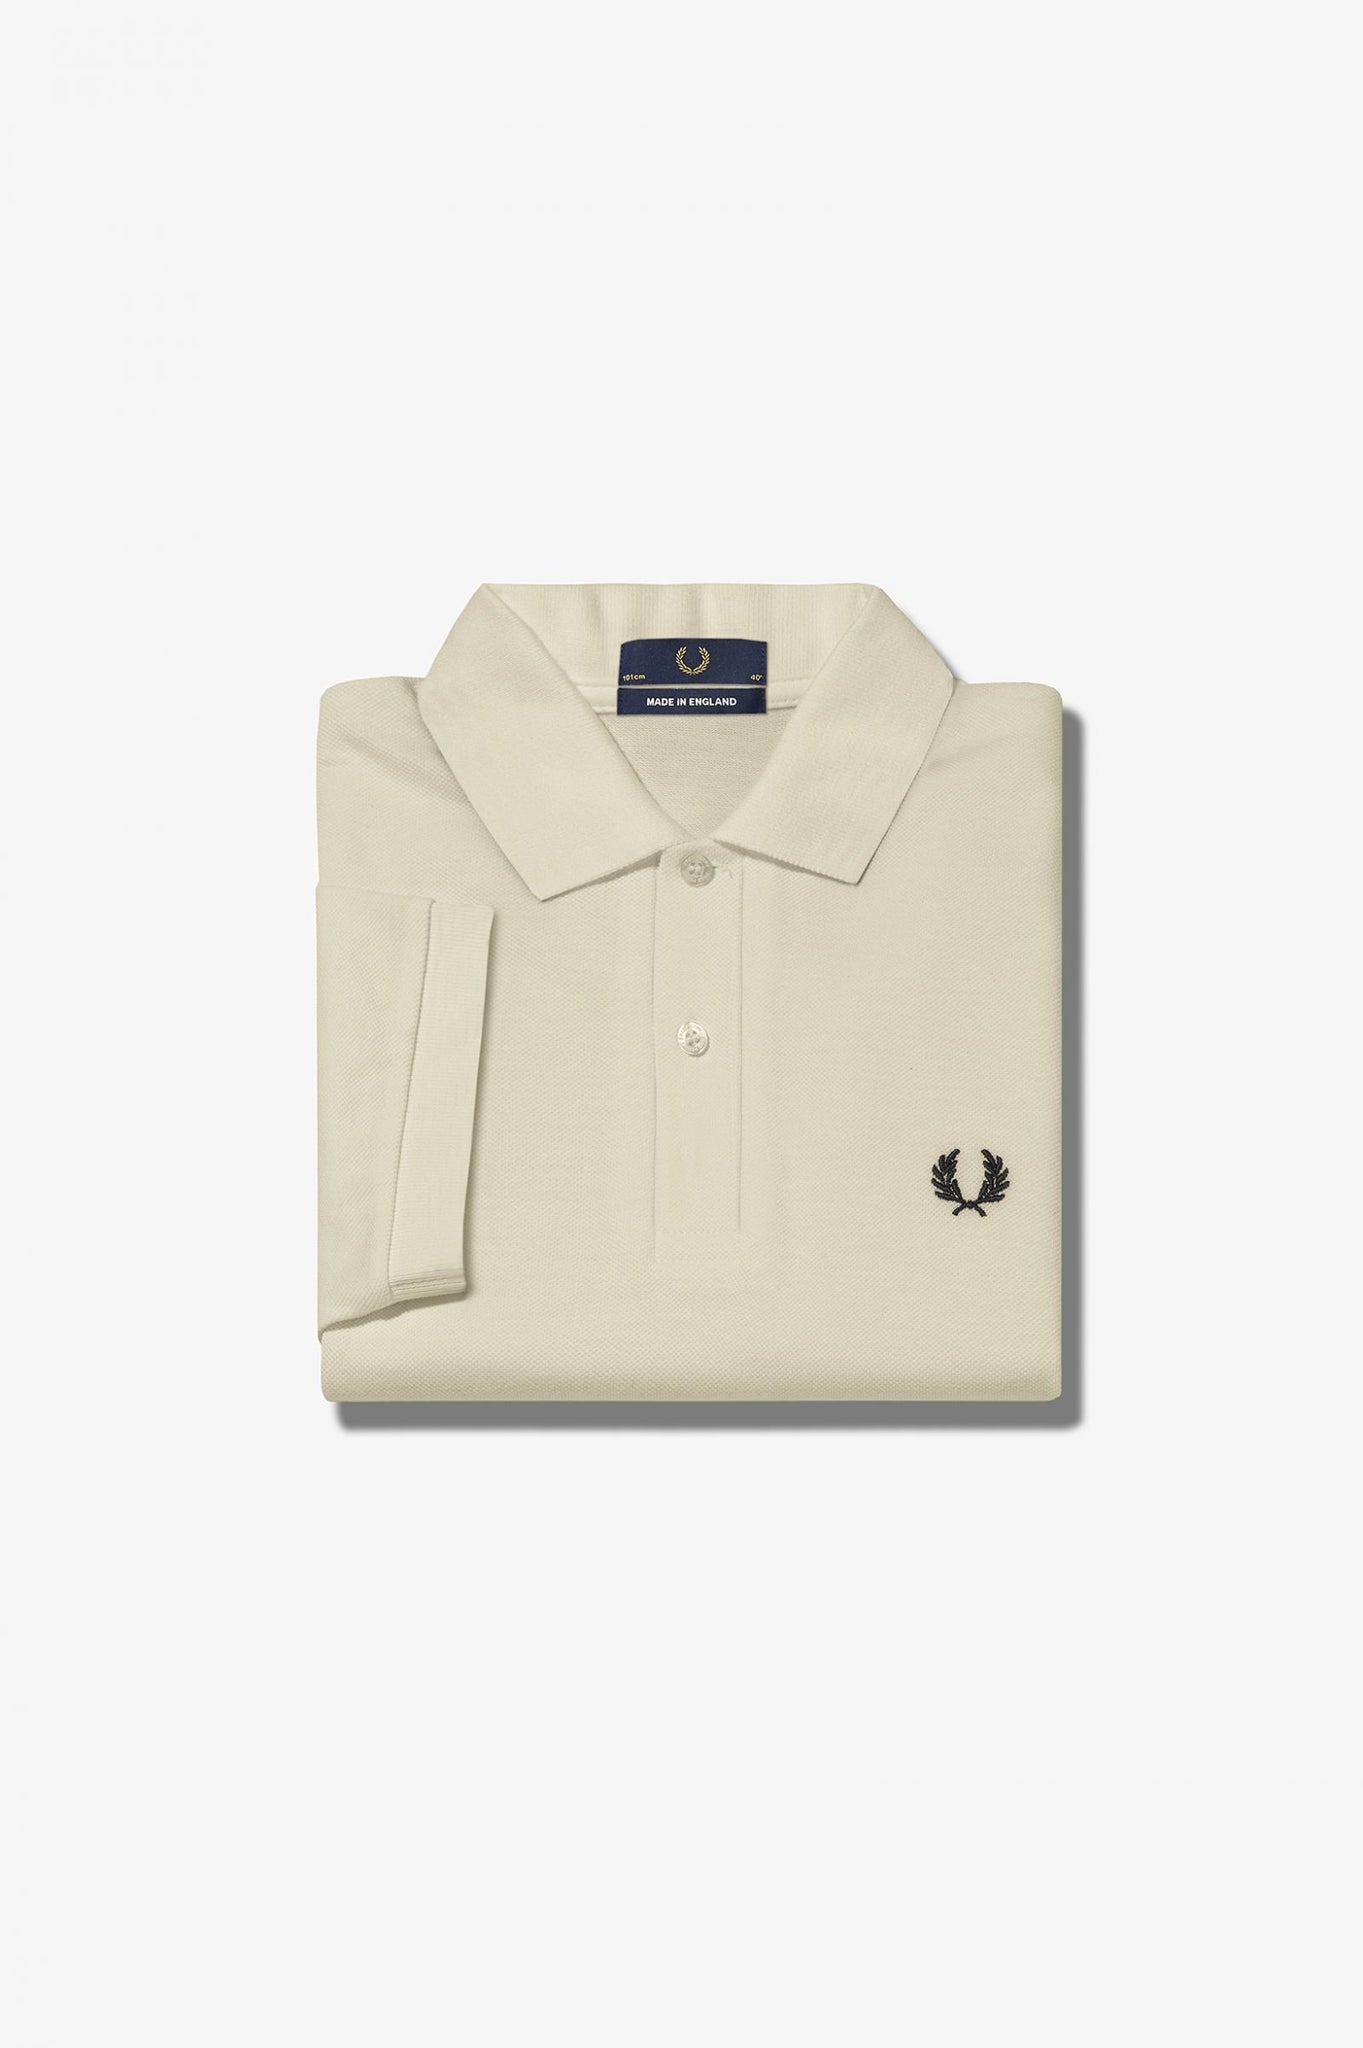 M3 THE ORIGINAL FRED PERRY SHIRT - 691 OATMEAL